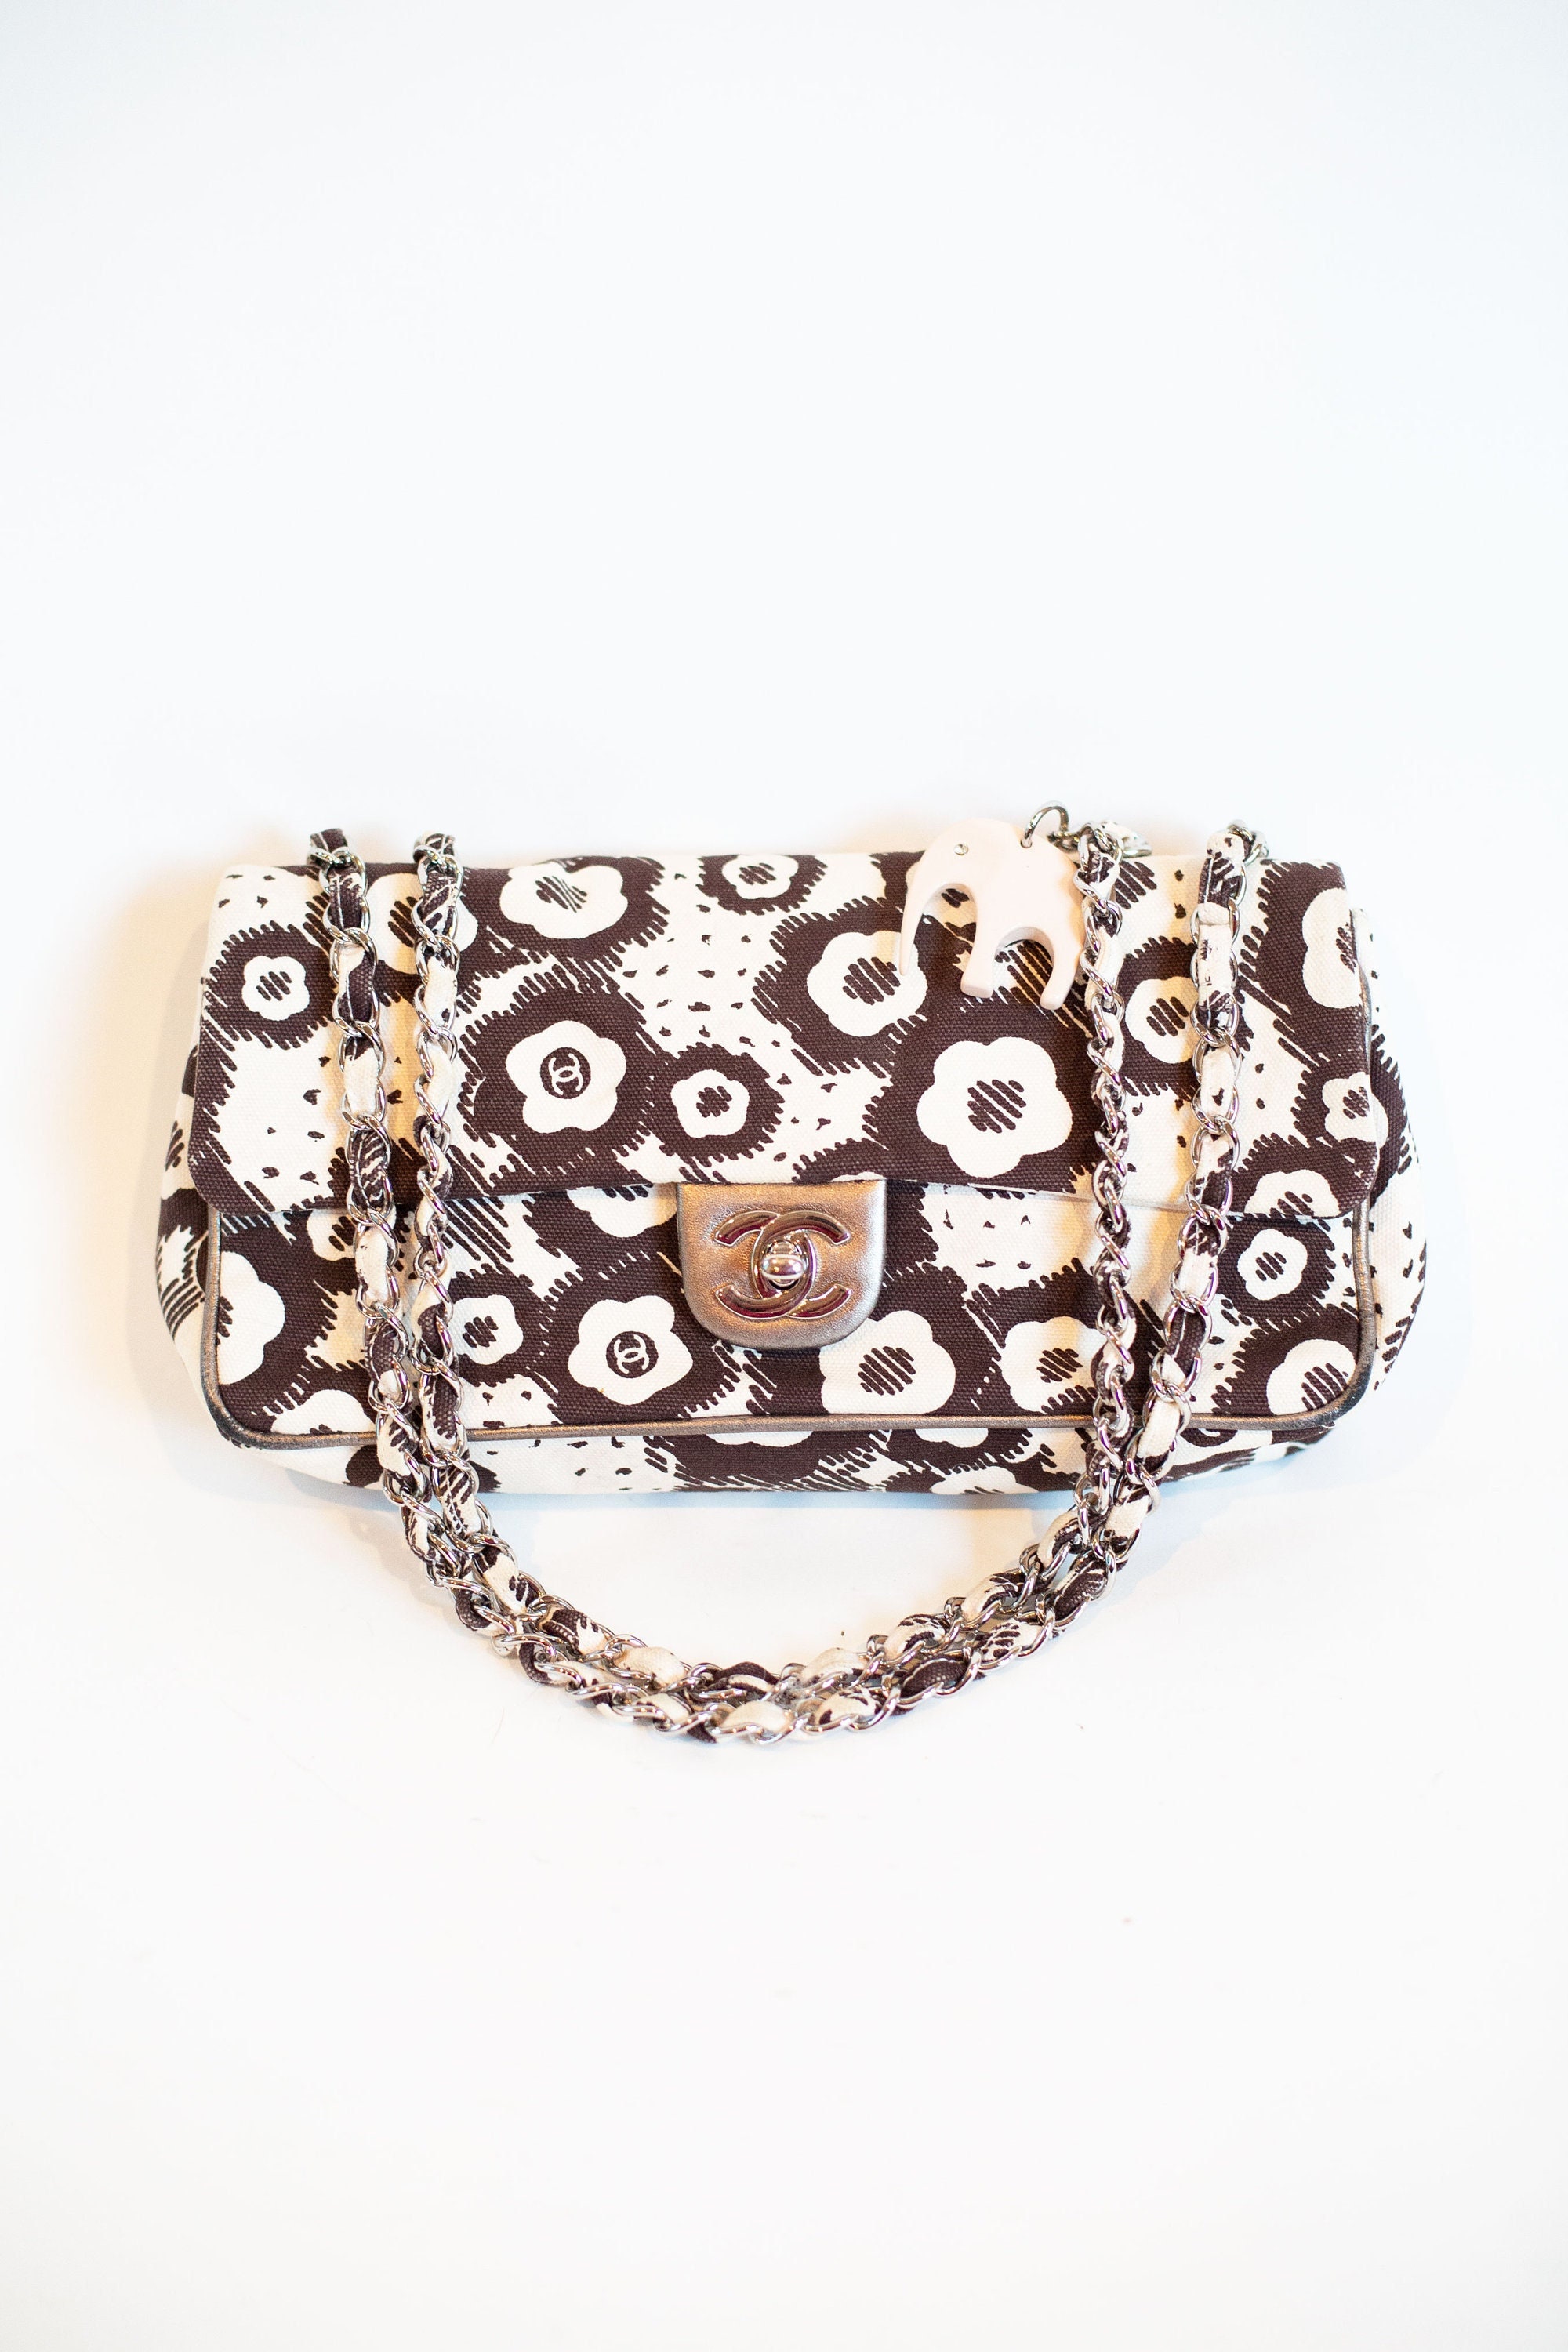 Vintage CHANEL Brown Cream Camellia Pattern Fabric Flap Bag 